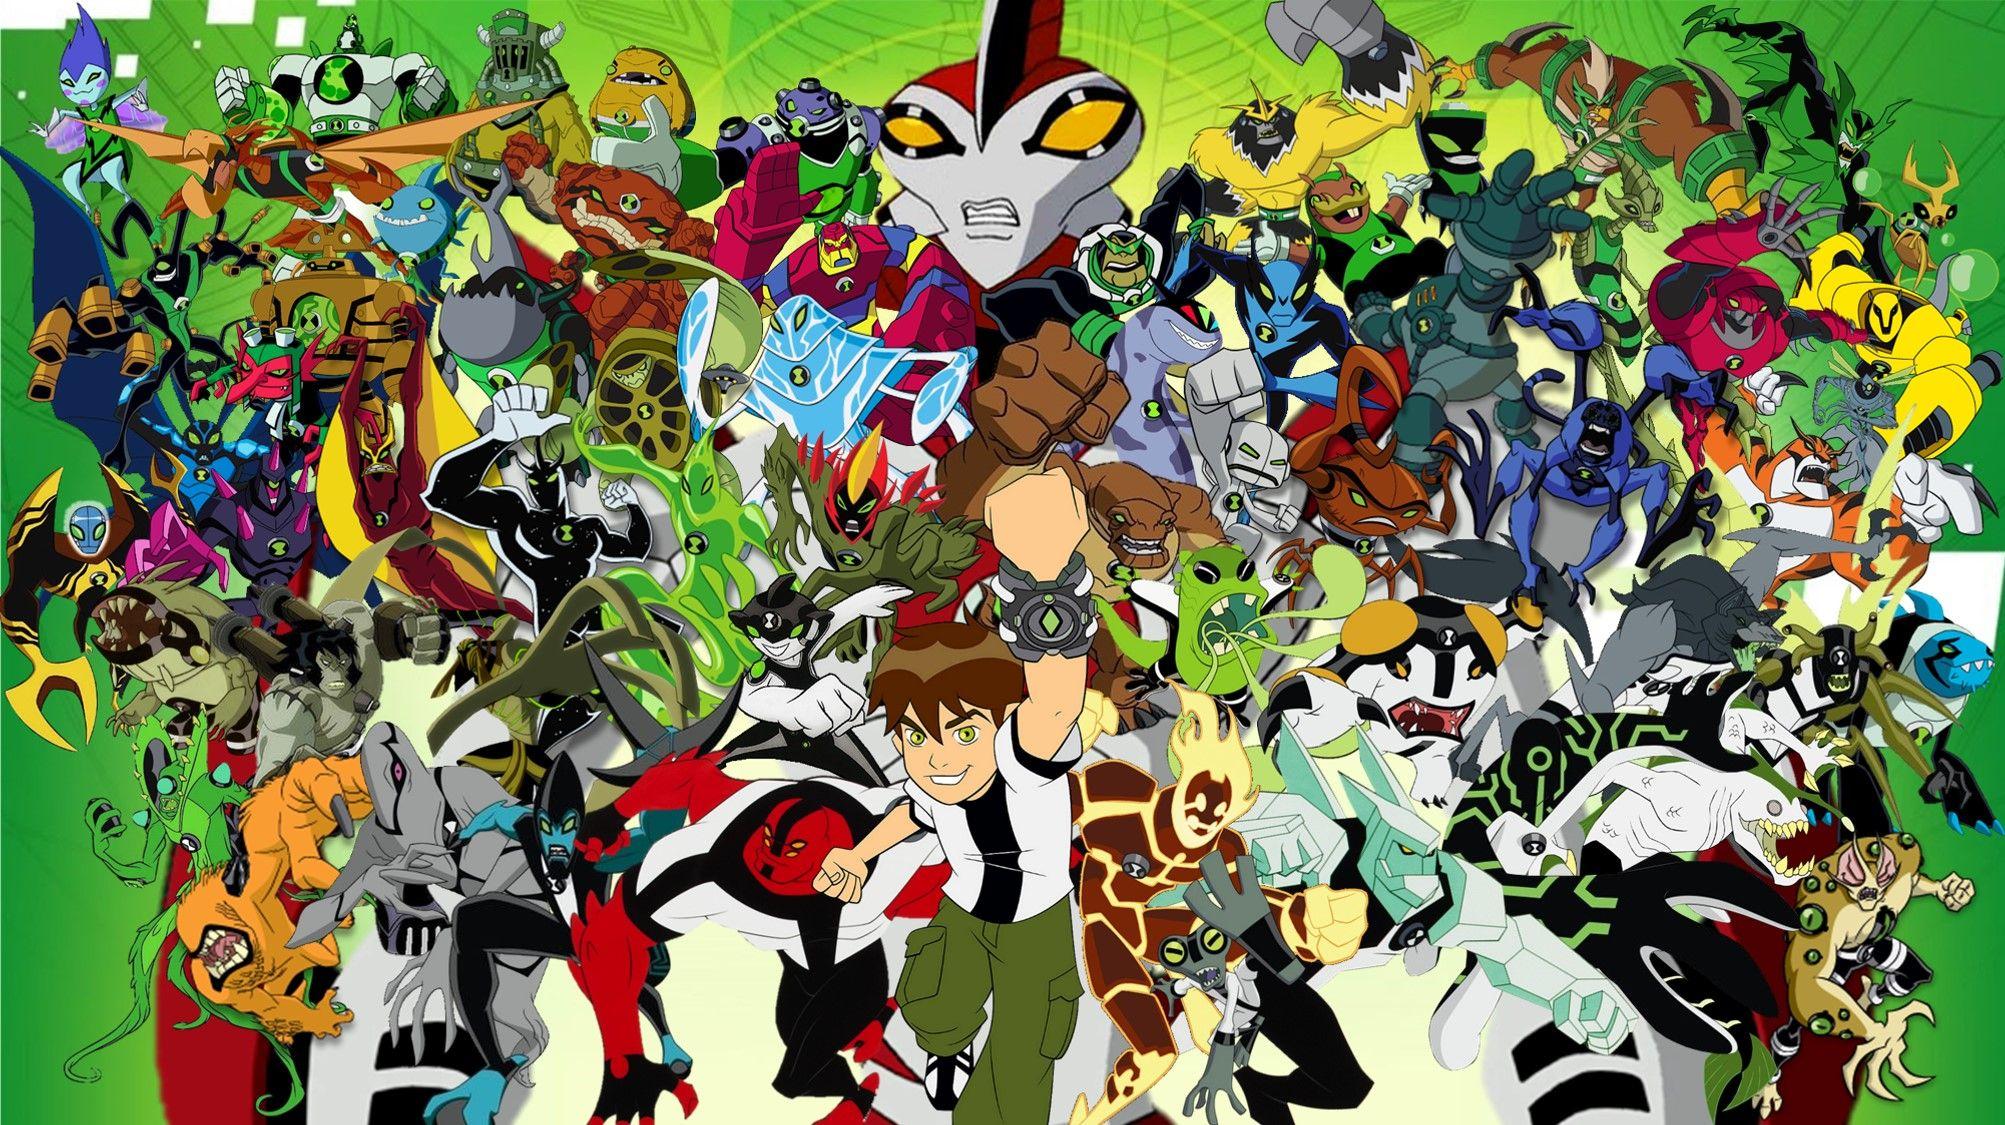 A Ben 10 wallpaper I made, featuring Ben and his 62